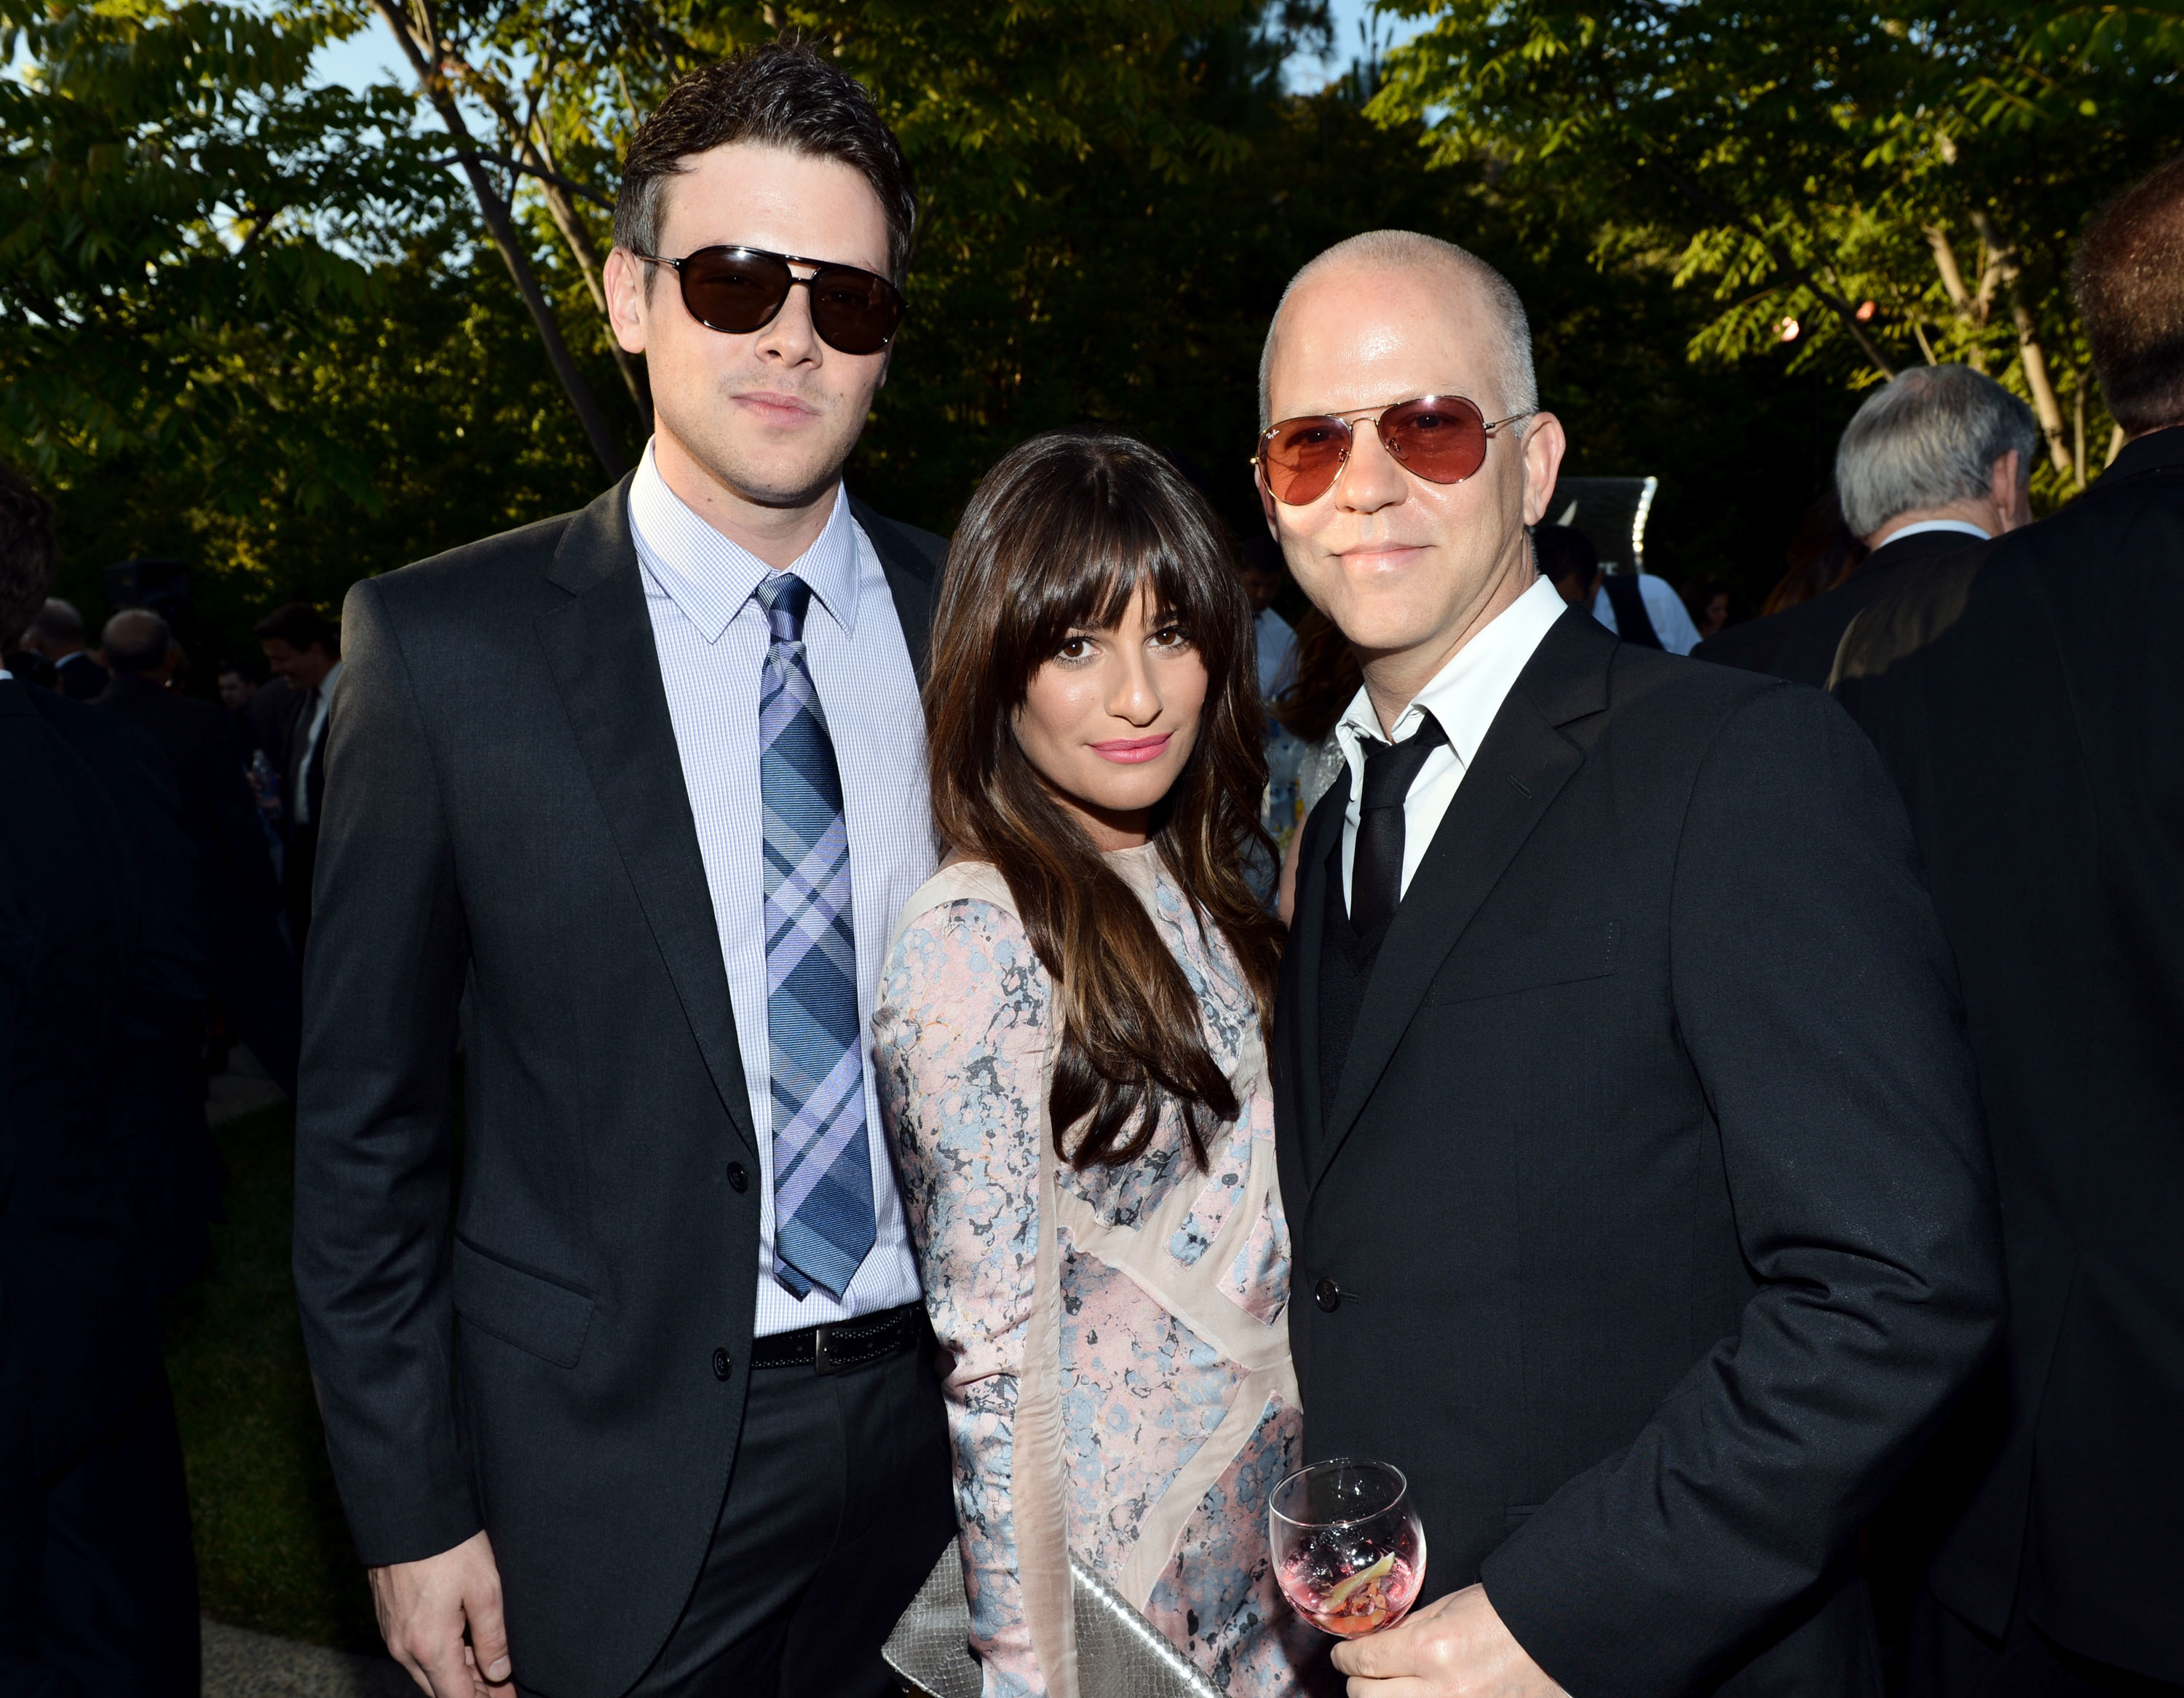 Cory, Lea, and Ryan taking a picture together